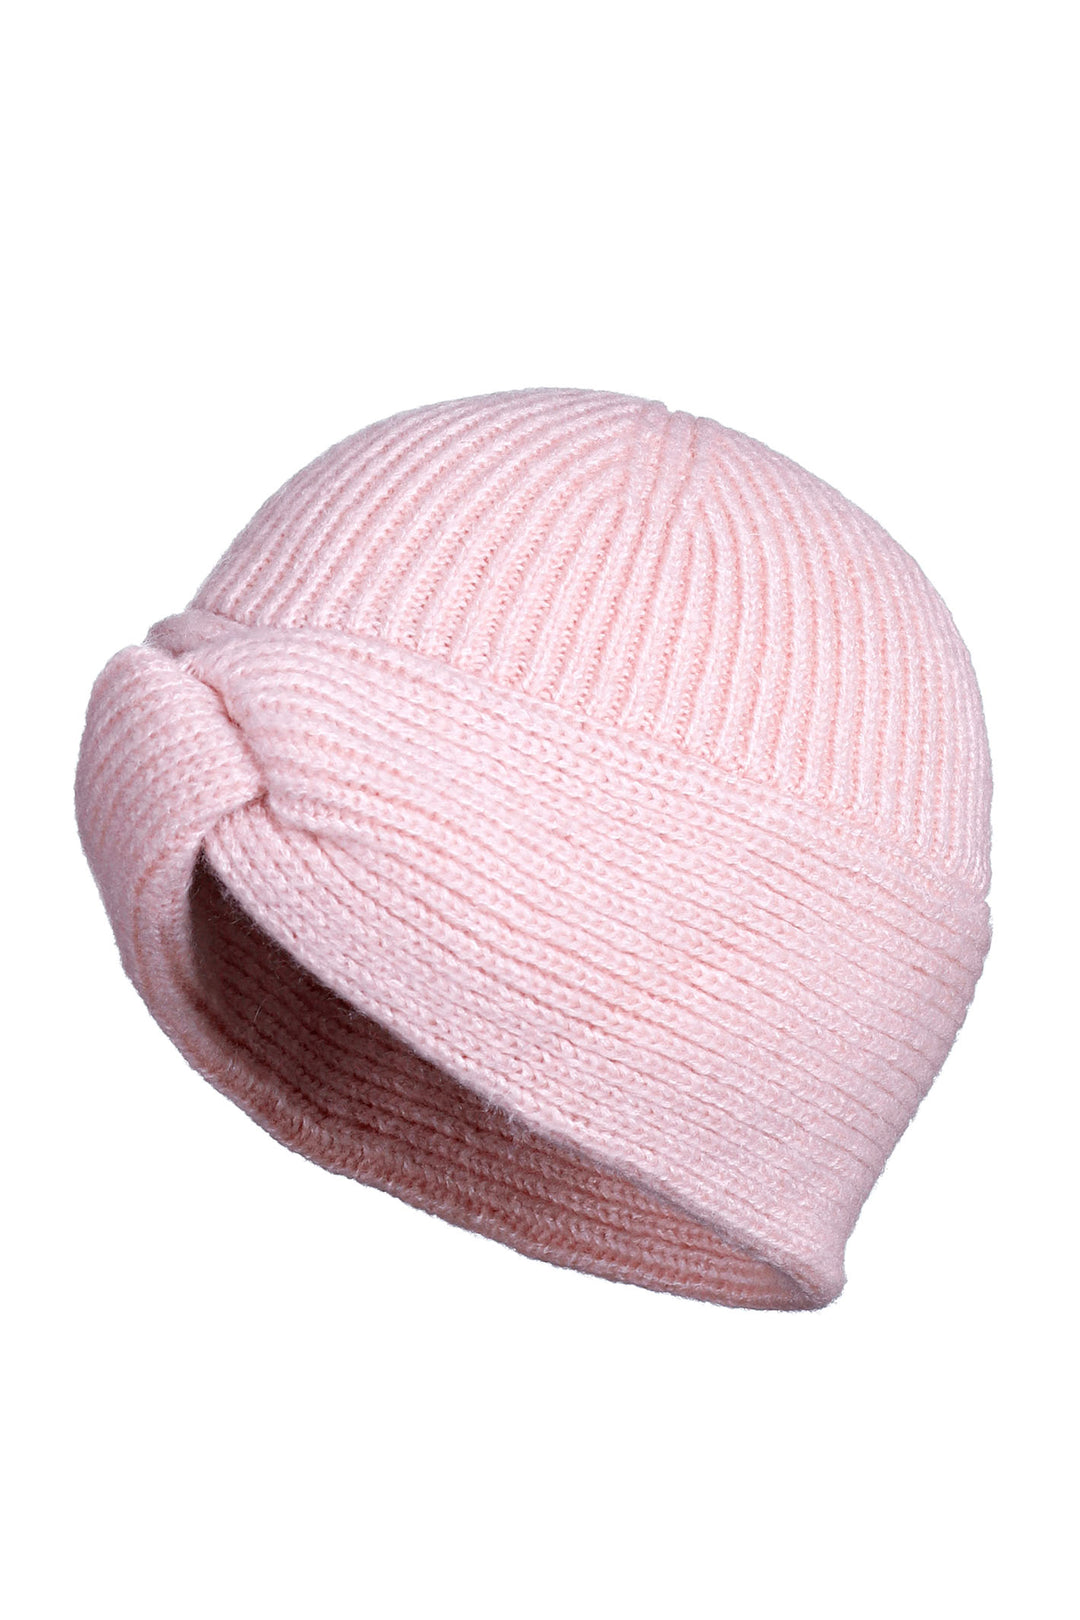 Fonem FO 2570 Somon Pink Knitted Hat - Shirley Allum Boutique